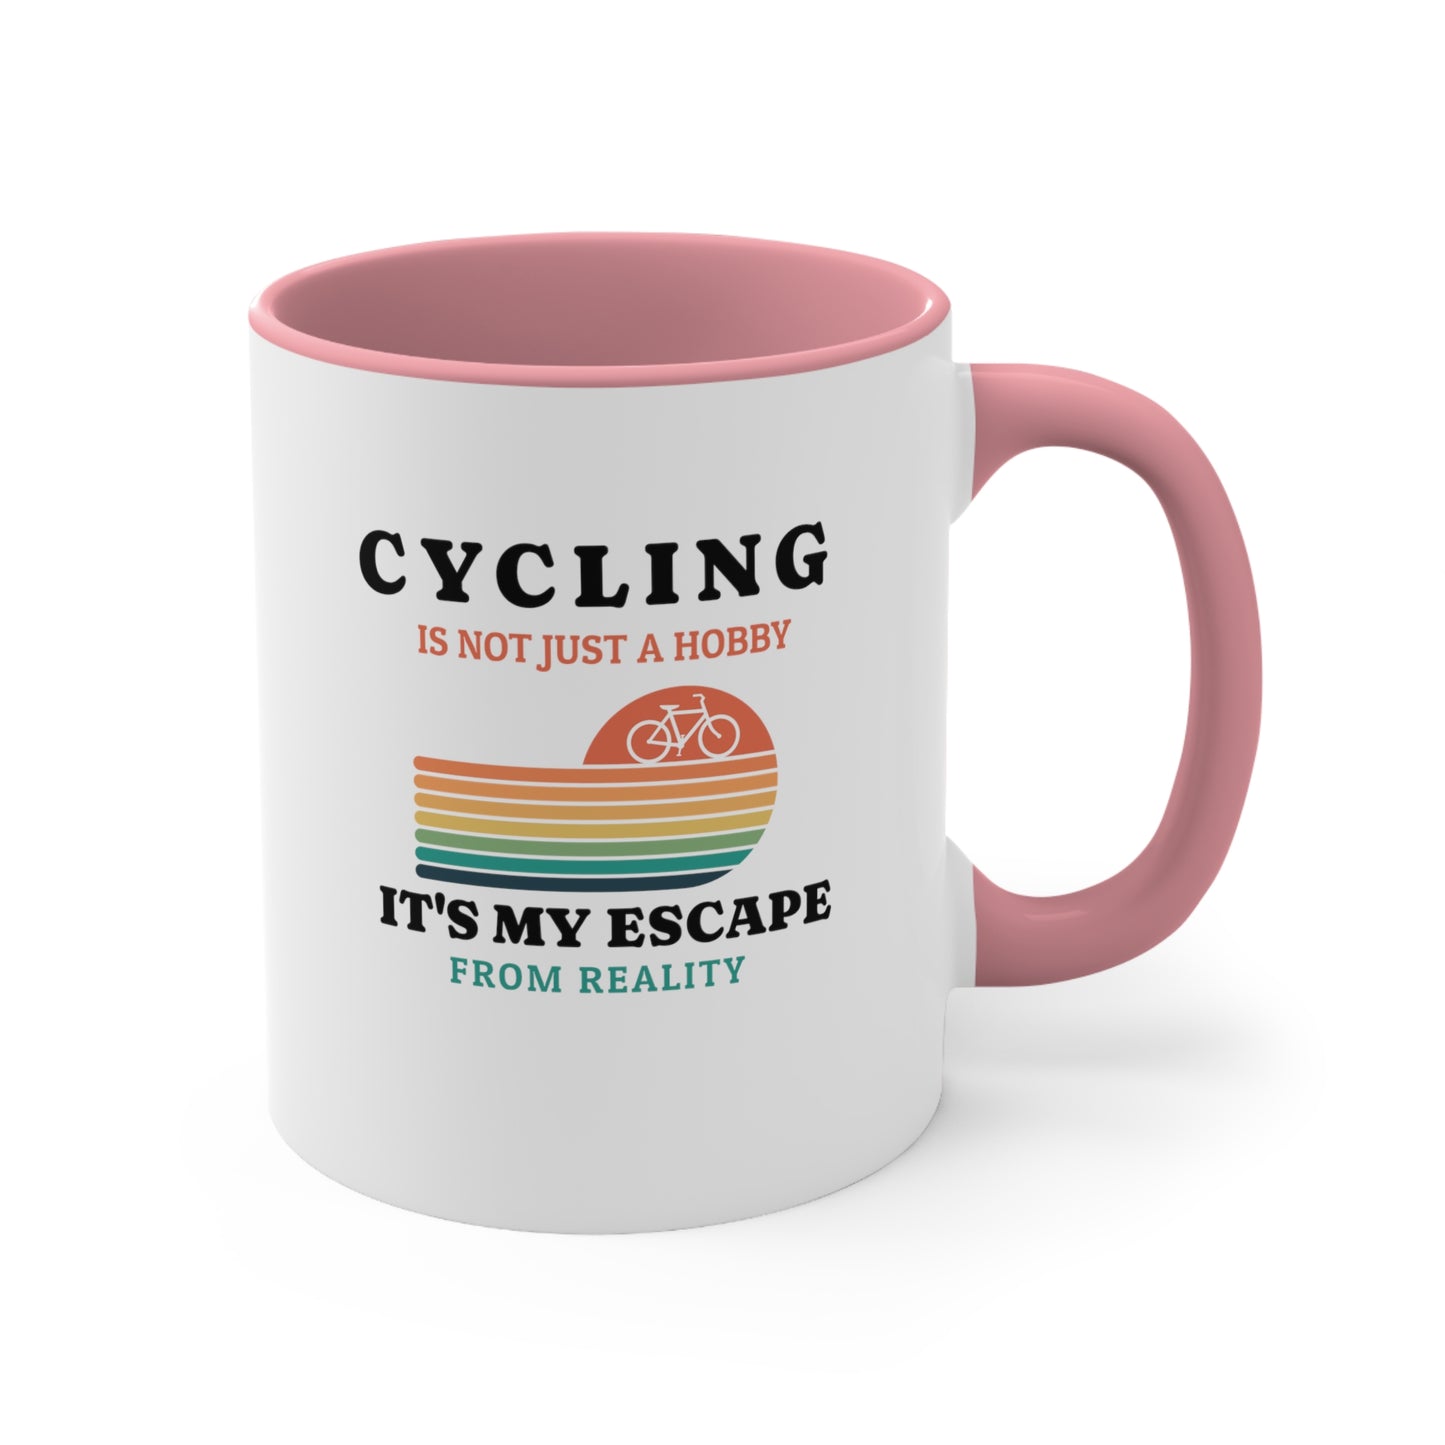 Cycling is not just a Hobby, it's my escape from reality Mug